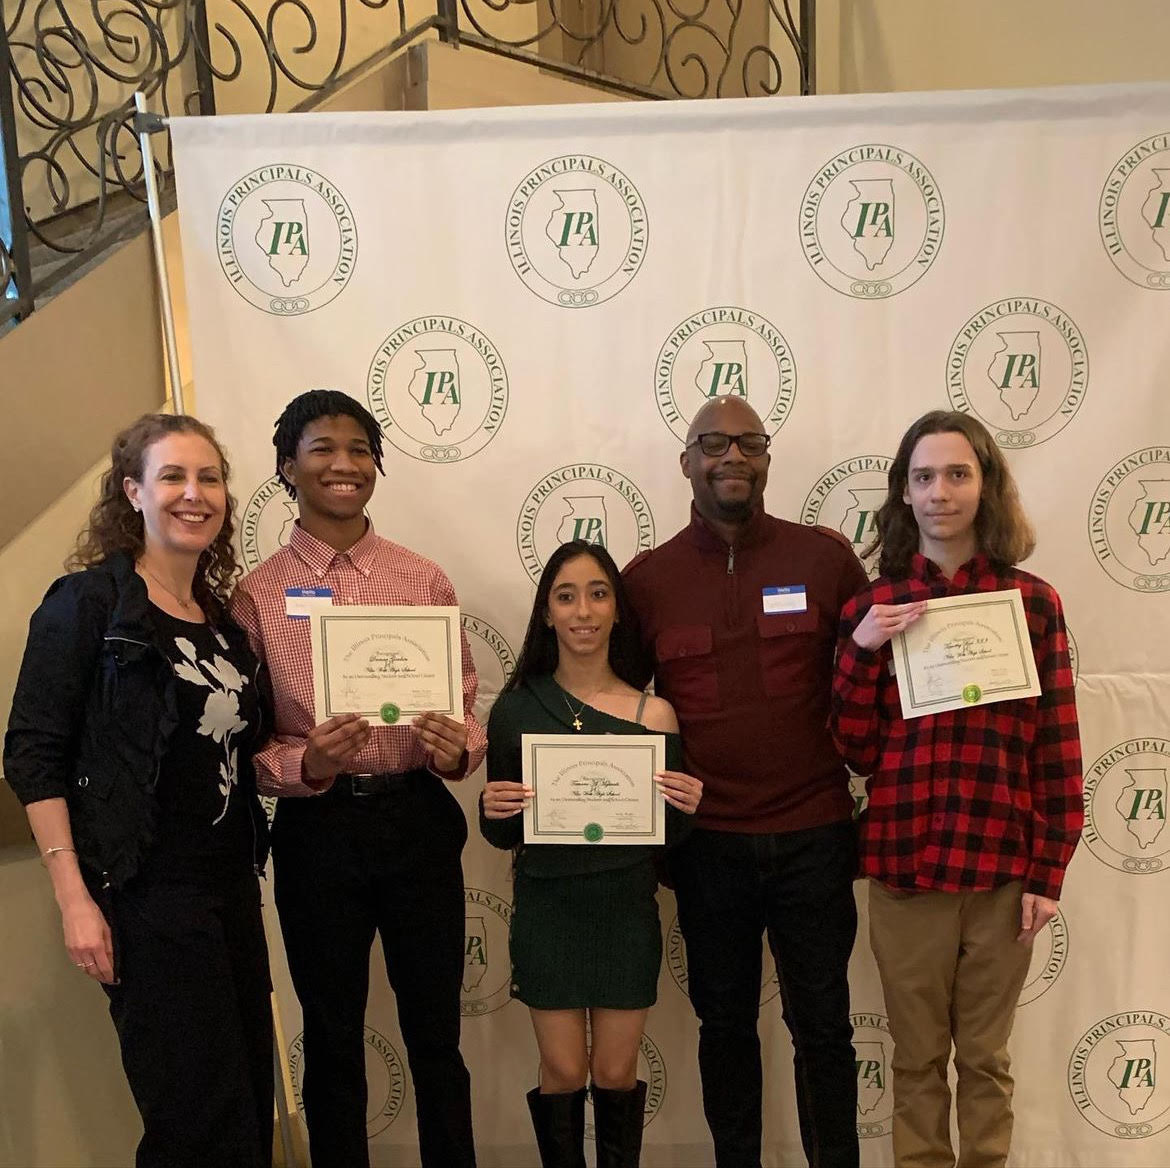 Students and Staff at the breakfast ceremony with certificates (from left to right), Dr. Tucker, Damar Gordon, Tamara Almghrabi, Principal Christian and Timothy Biel.